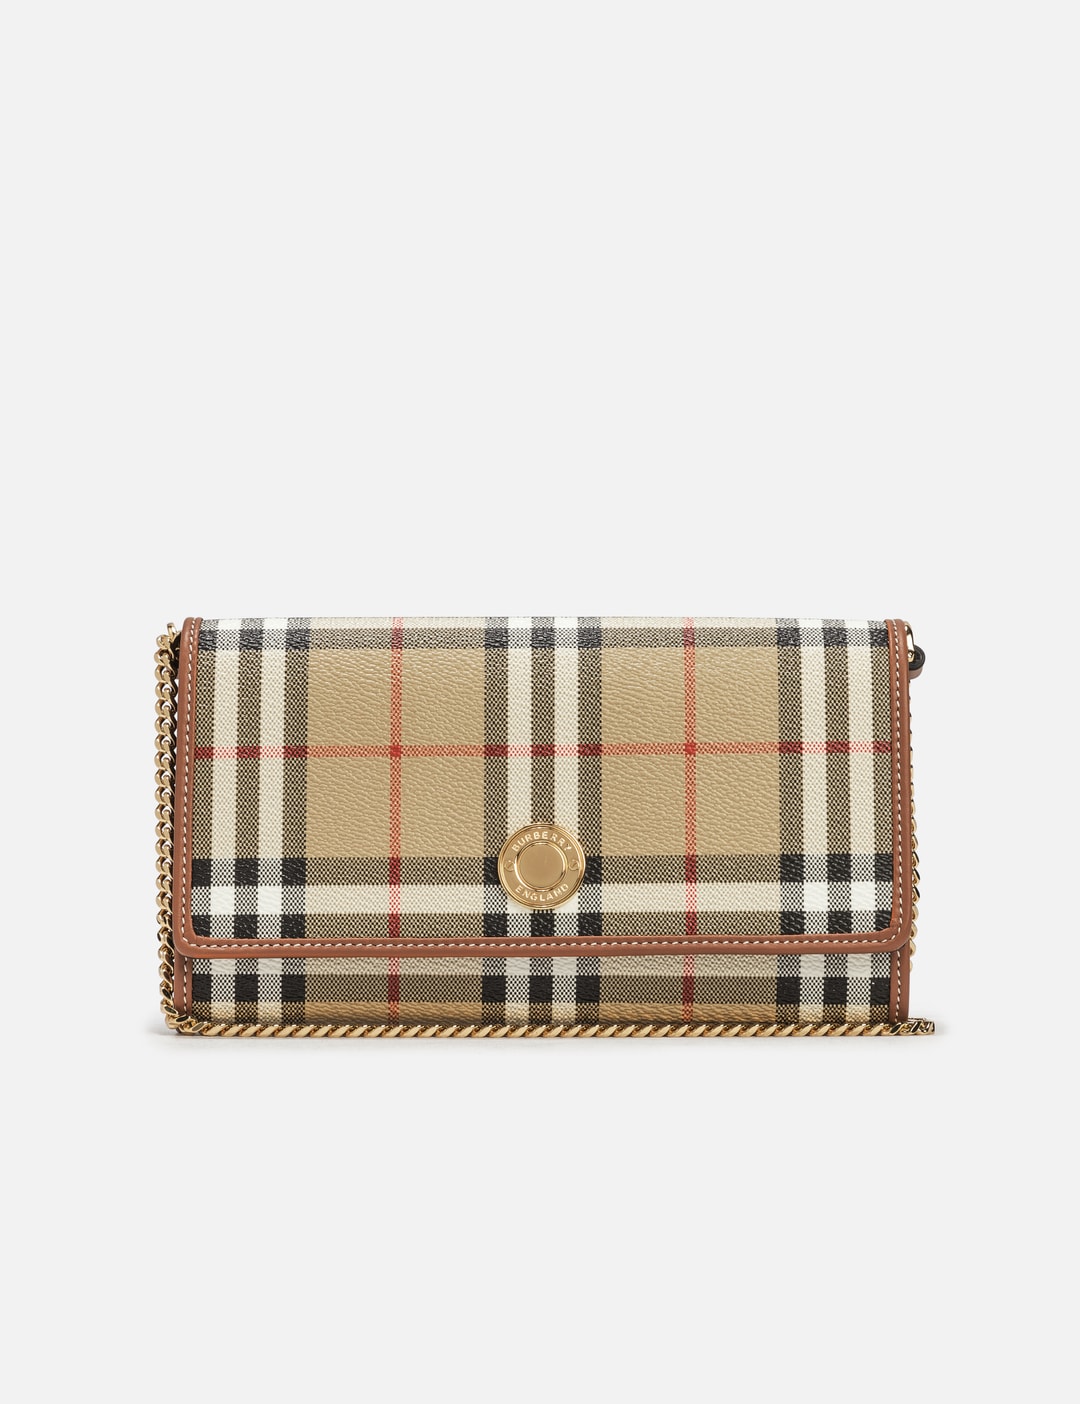 NWT Burberry Check Zip Kelbrook Coin Wallet w/Chain